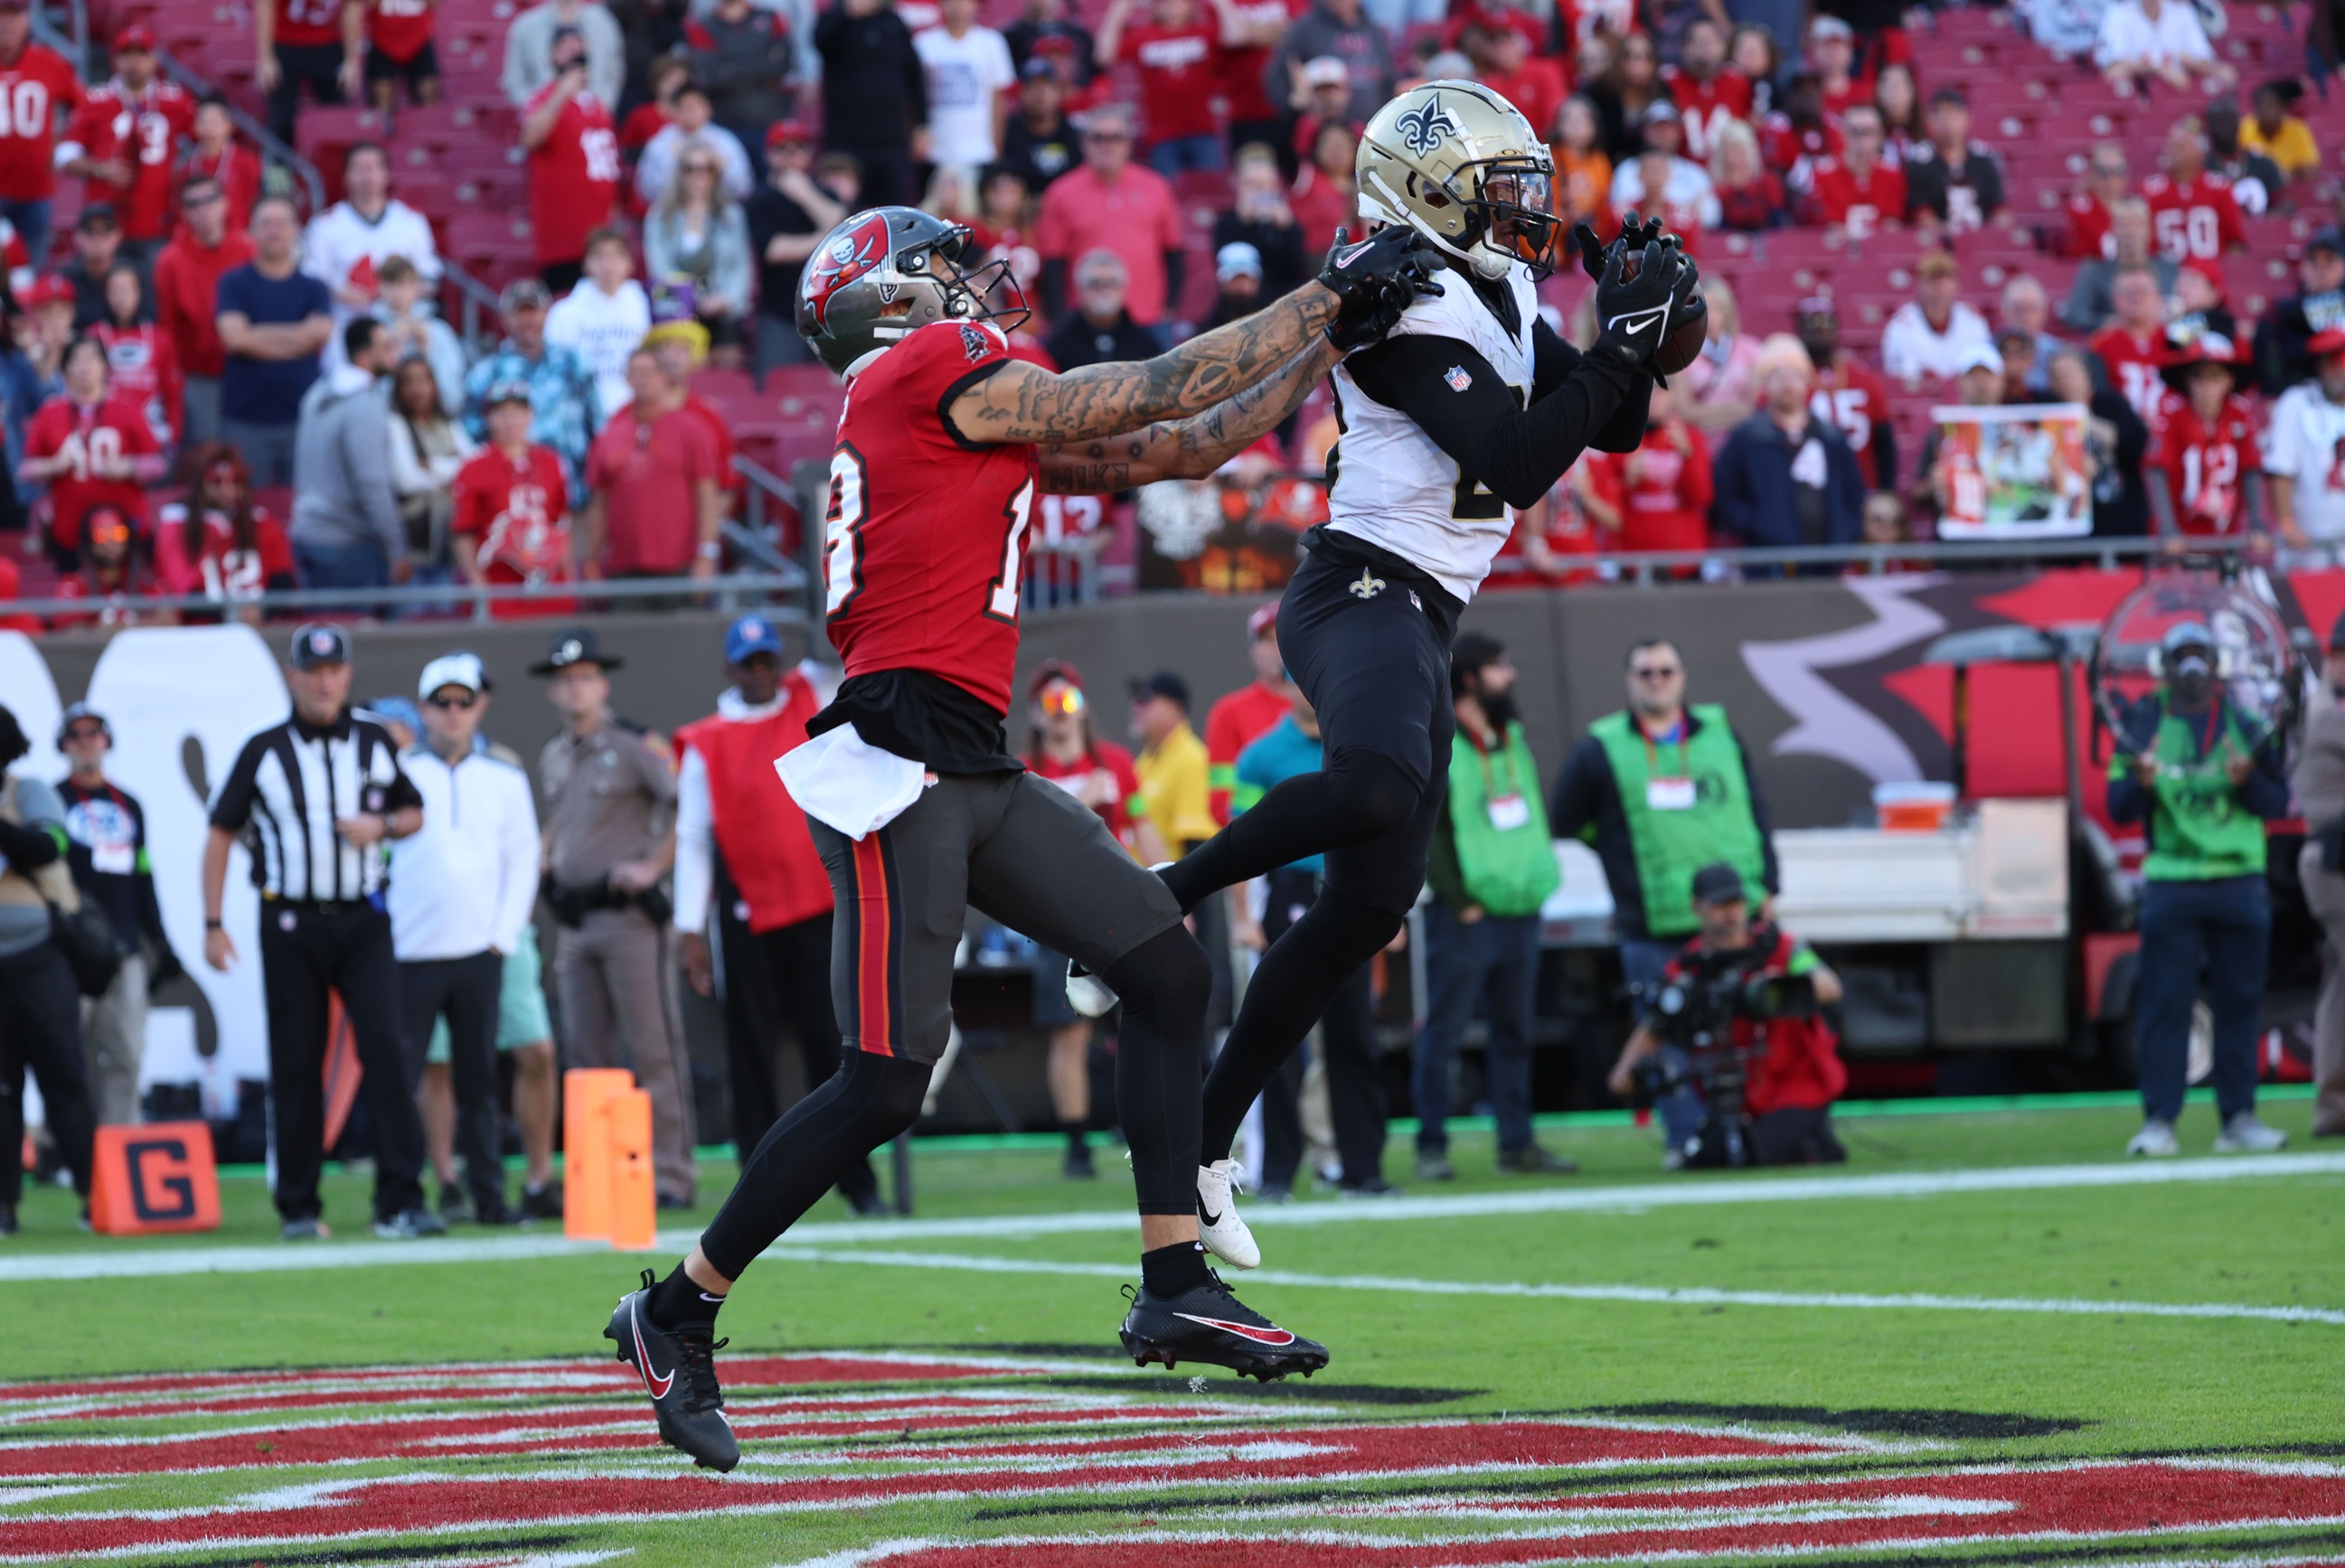 New Orleans Saints cornerback Paulson Adebo (29) intercepted a ball Tampa Bay Buccaneers receiver Mike Evans (13). Mandatory Credit: Kim Klement Neitzel-USA TODAY Sports